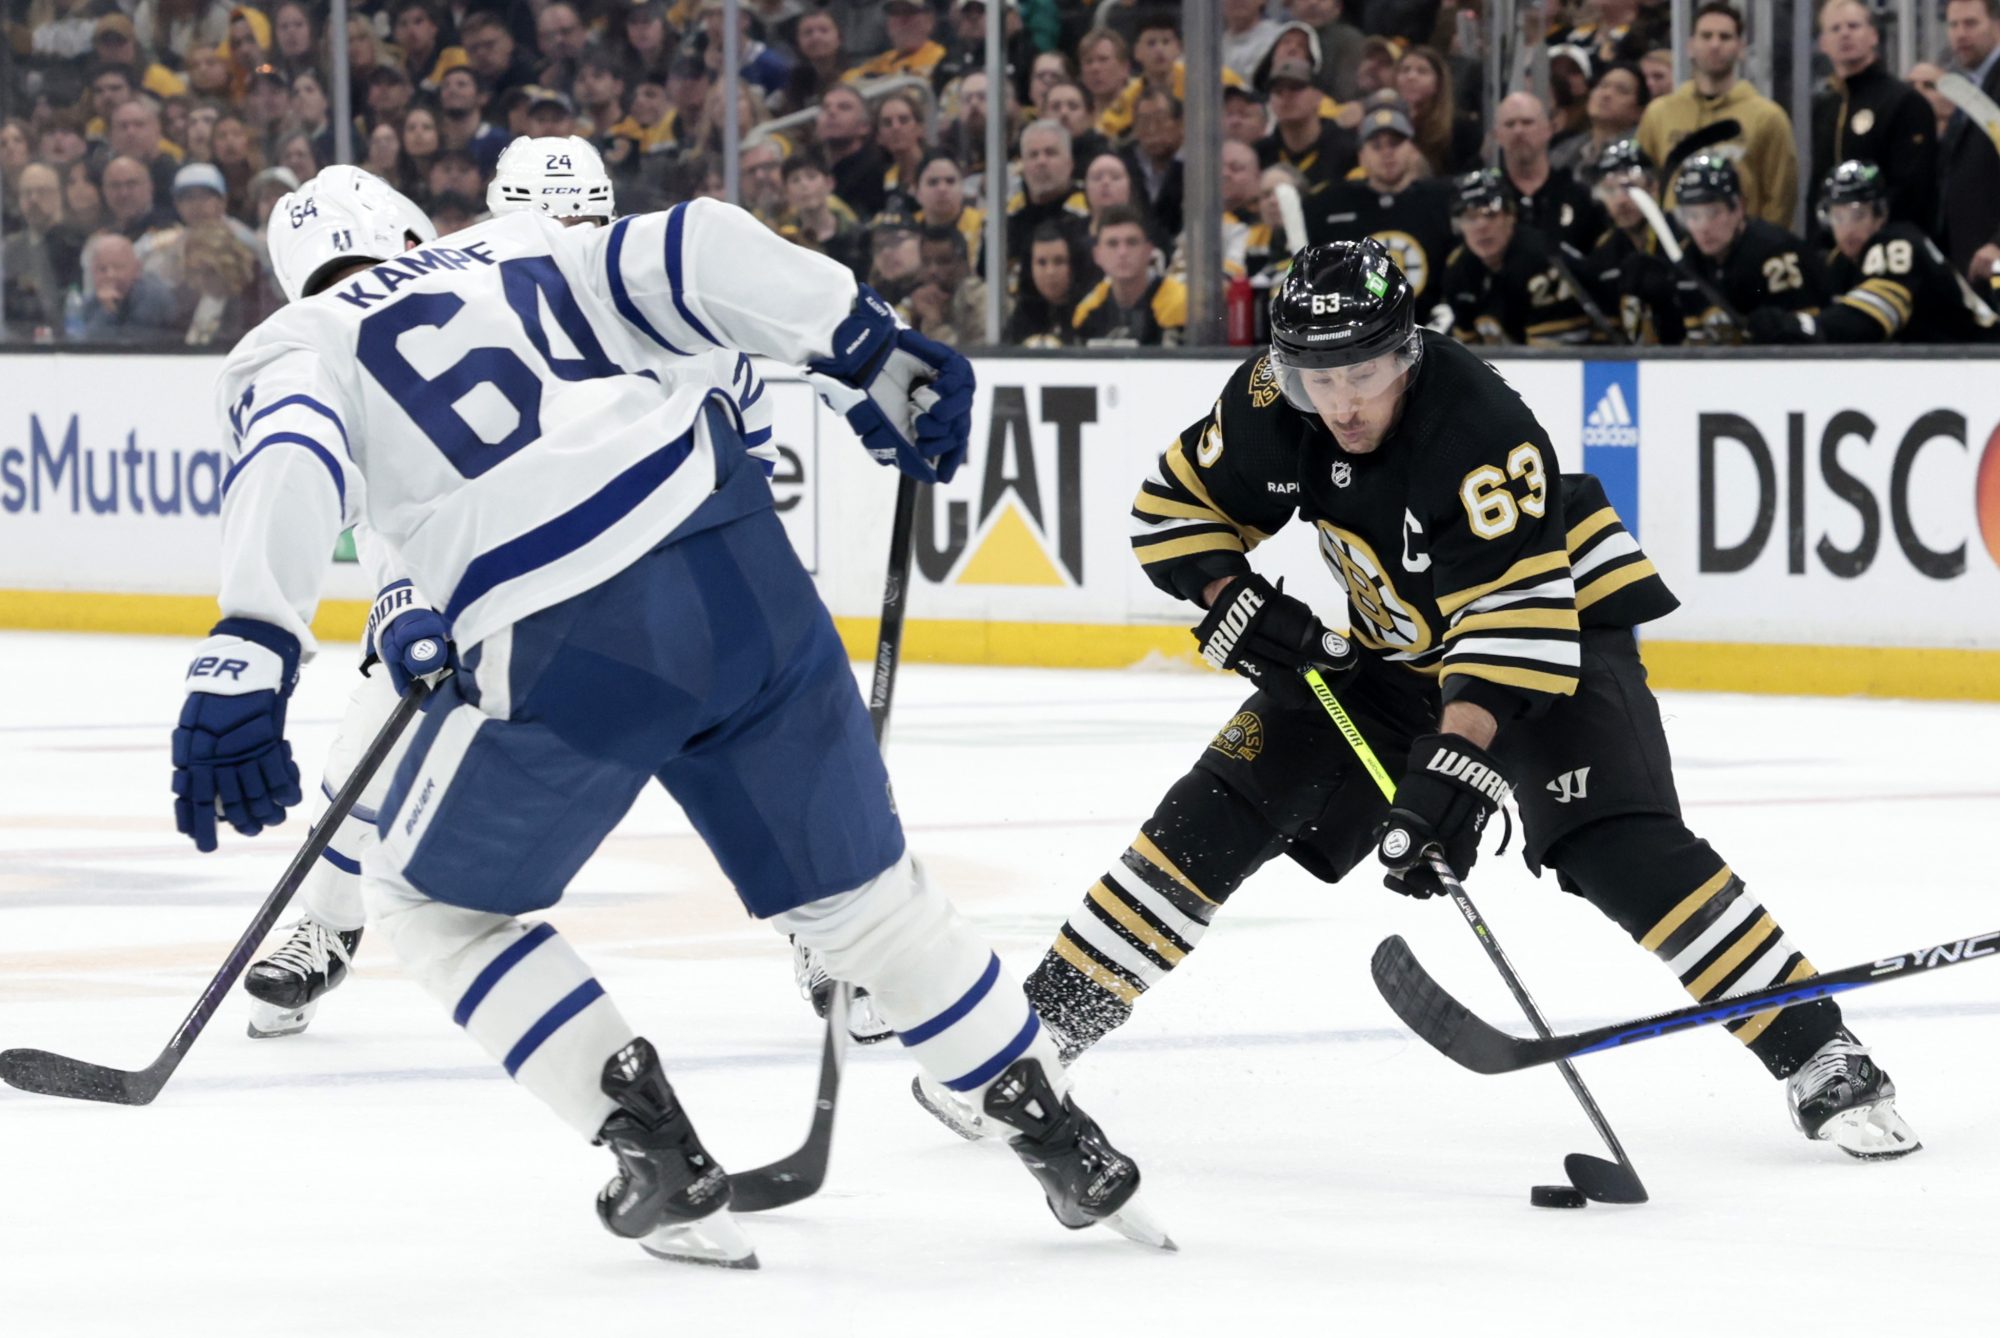 The Bruins were the better team in Game 1, but Toronto showed some resolve in Game 2 to get the series back on level terms.